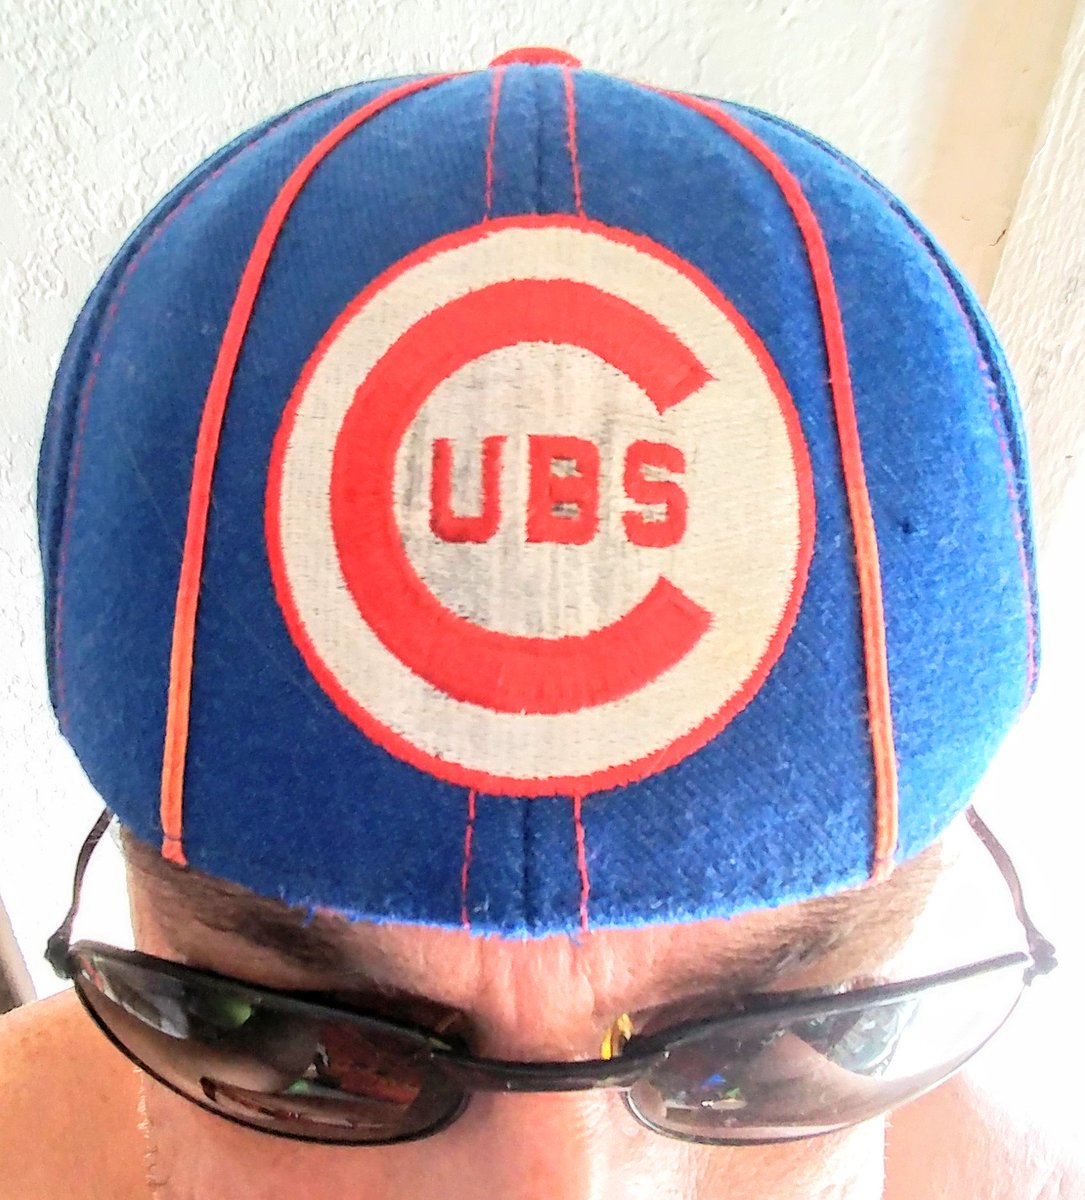 Day 87 of A 3rd Year of Hat
Vintage Style Cubs yatZig y!beanie
{Altered by yatZig}
AnnCo (Since 1918)
3/28/2o19
#a3rdYearOfHats #yatZig
#hat #cap #beret #chapeau 
#ybeanie #beanie
#cubs #chicago #chicagocubs 
#mlb #baseball #openingday
#cooperstowncollection
#annco
 #bangladesh